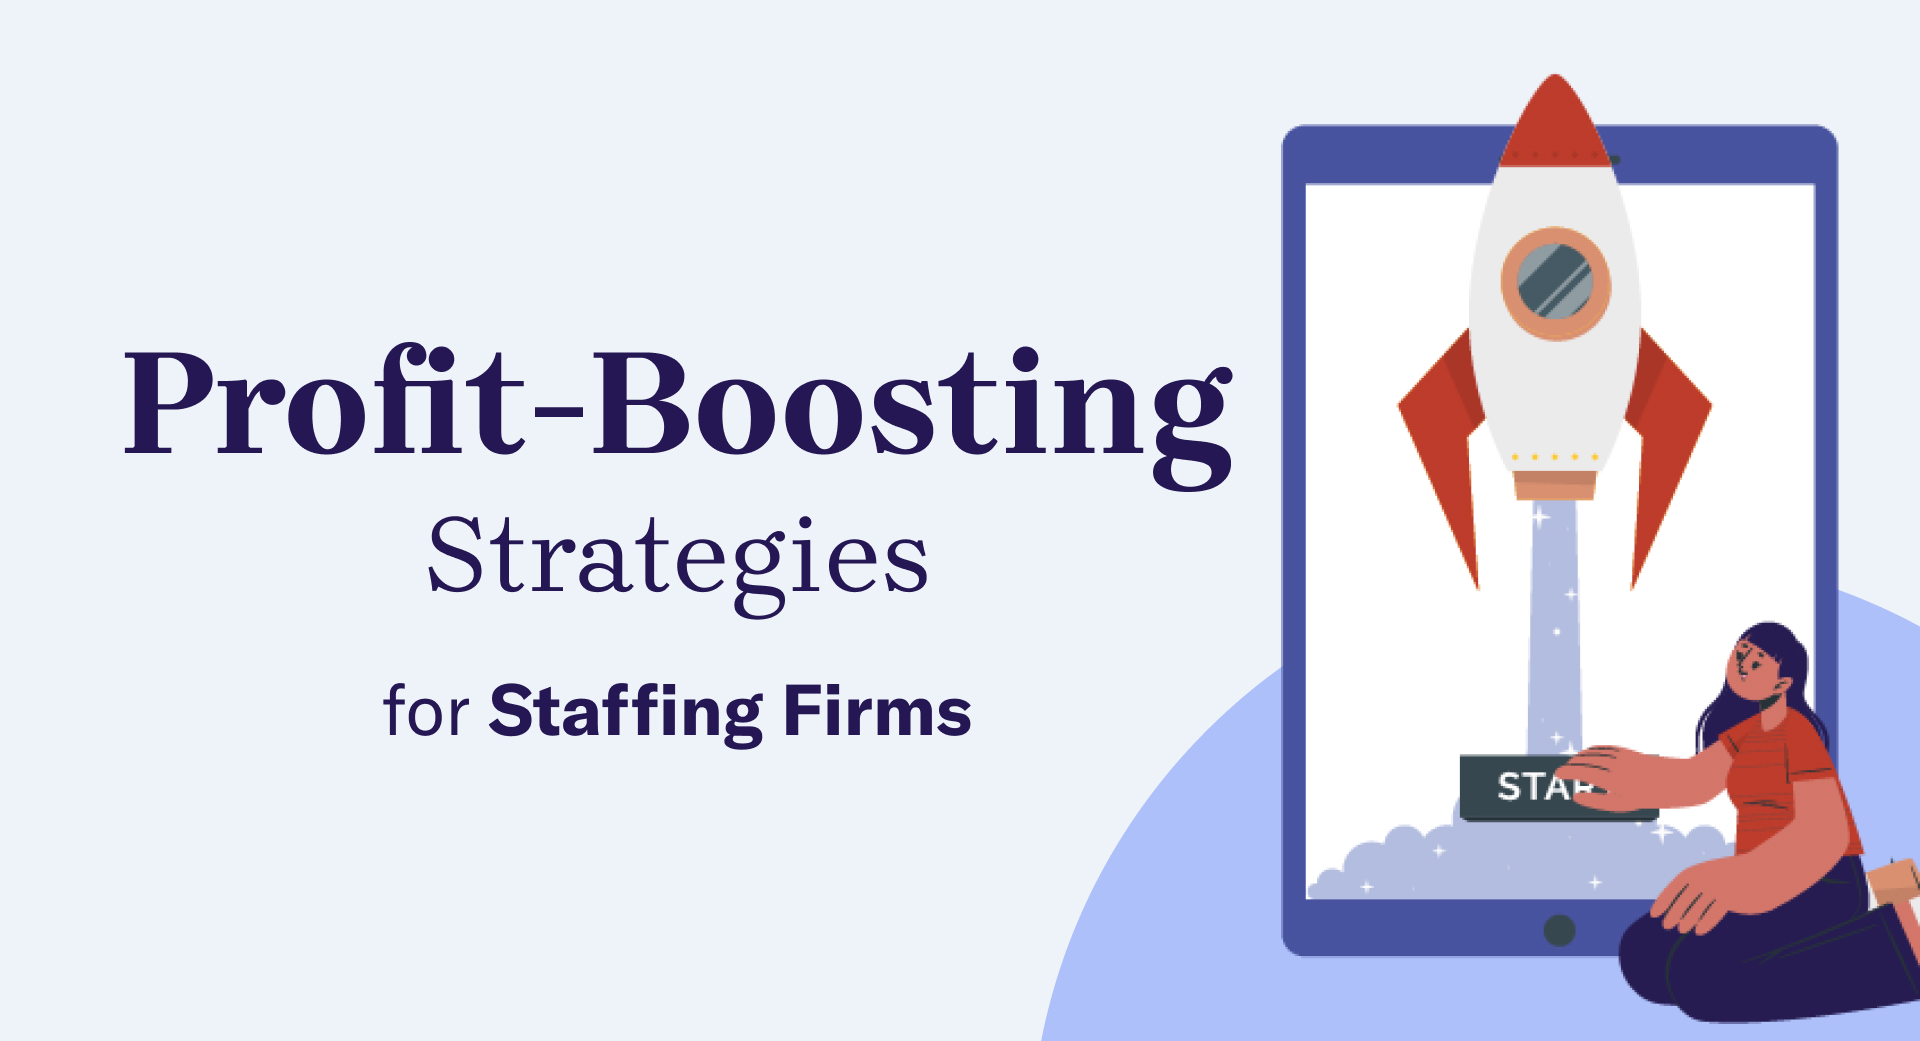 6 Profit-Boosting Strategies for Staffing Firms